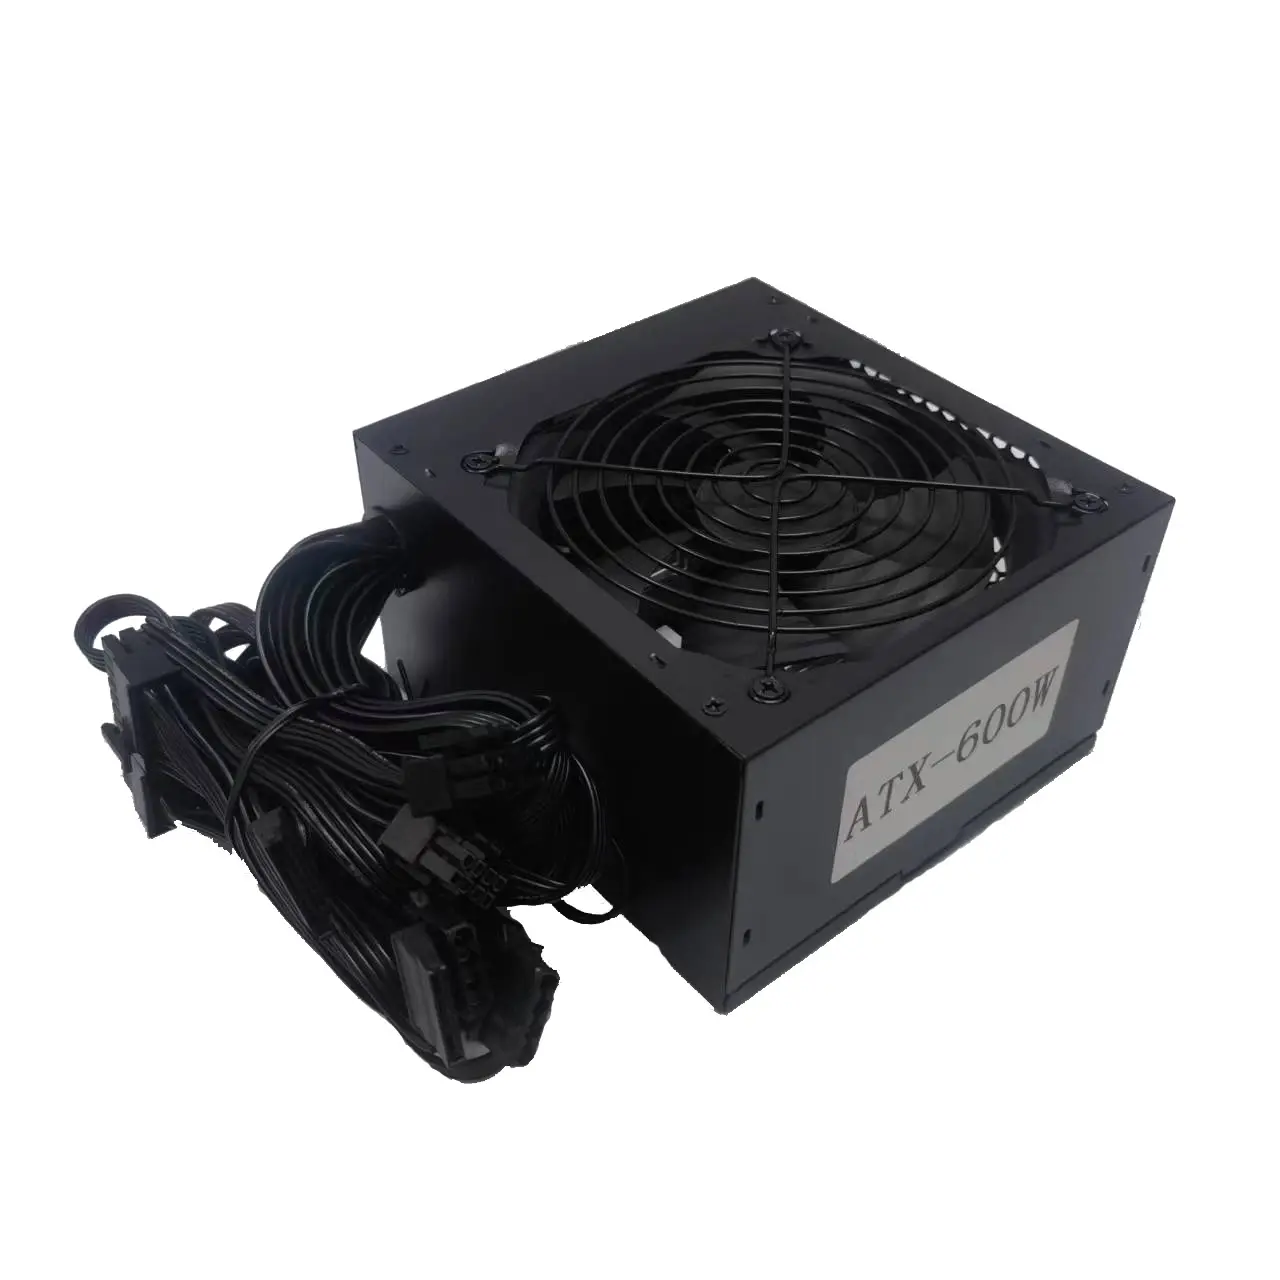 ATX Power Supply 600W PC PSU With 12CM Fan Black Cover for Computer Gaming Office Case